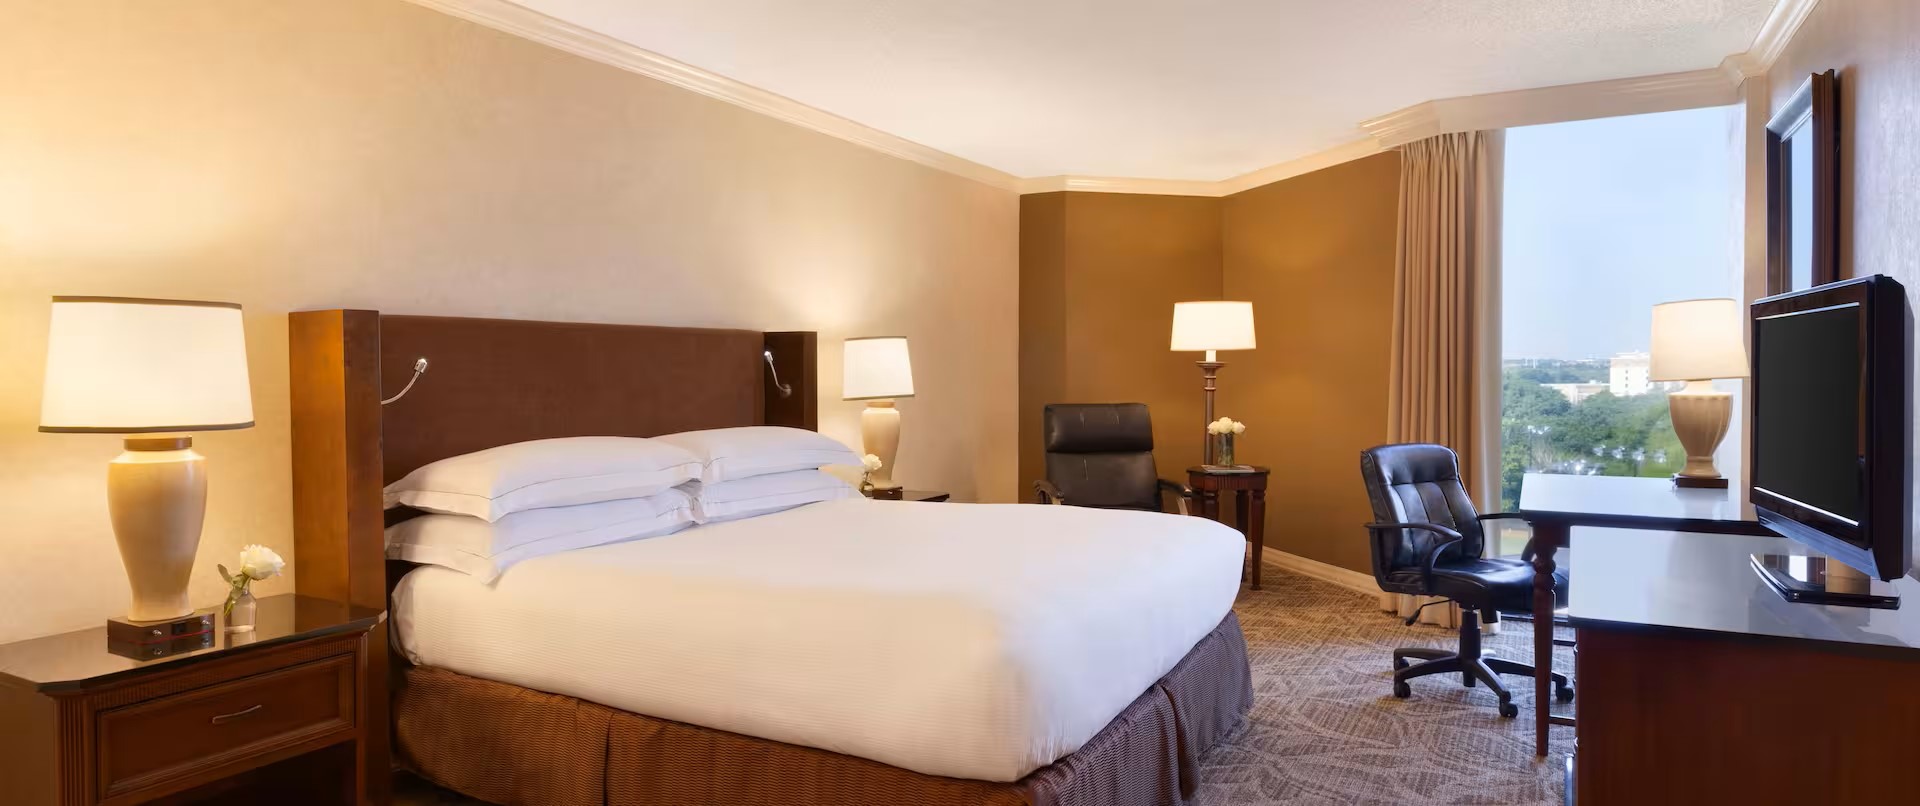 Hilton DFW Lakes King Bed Guestroom